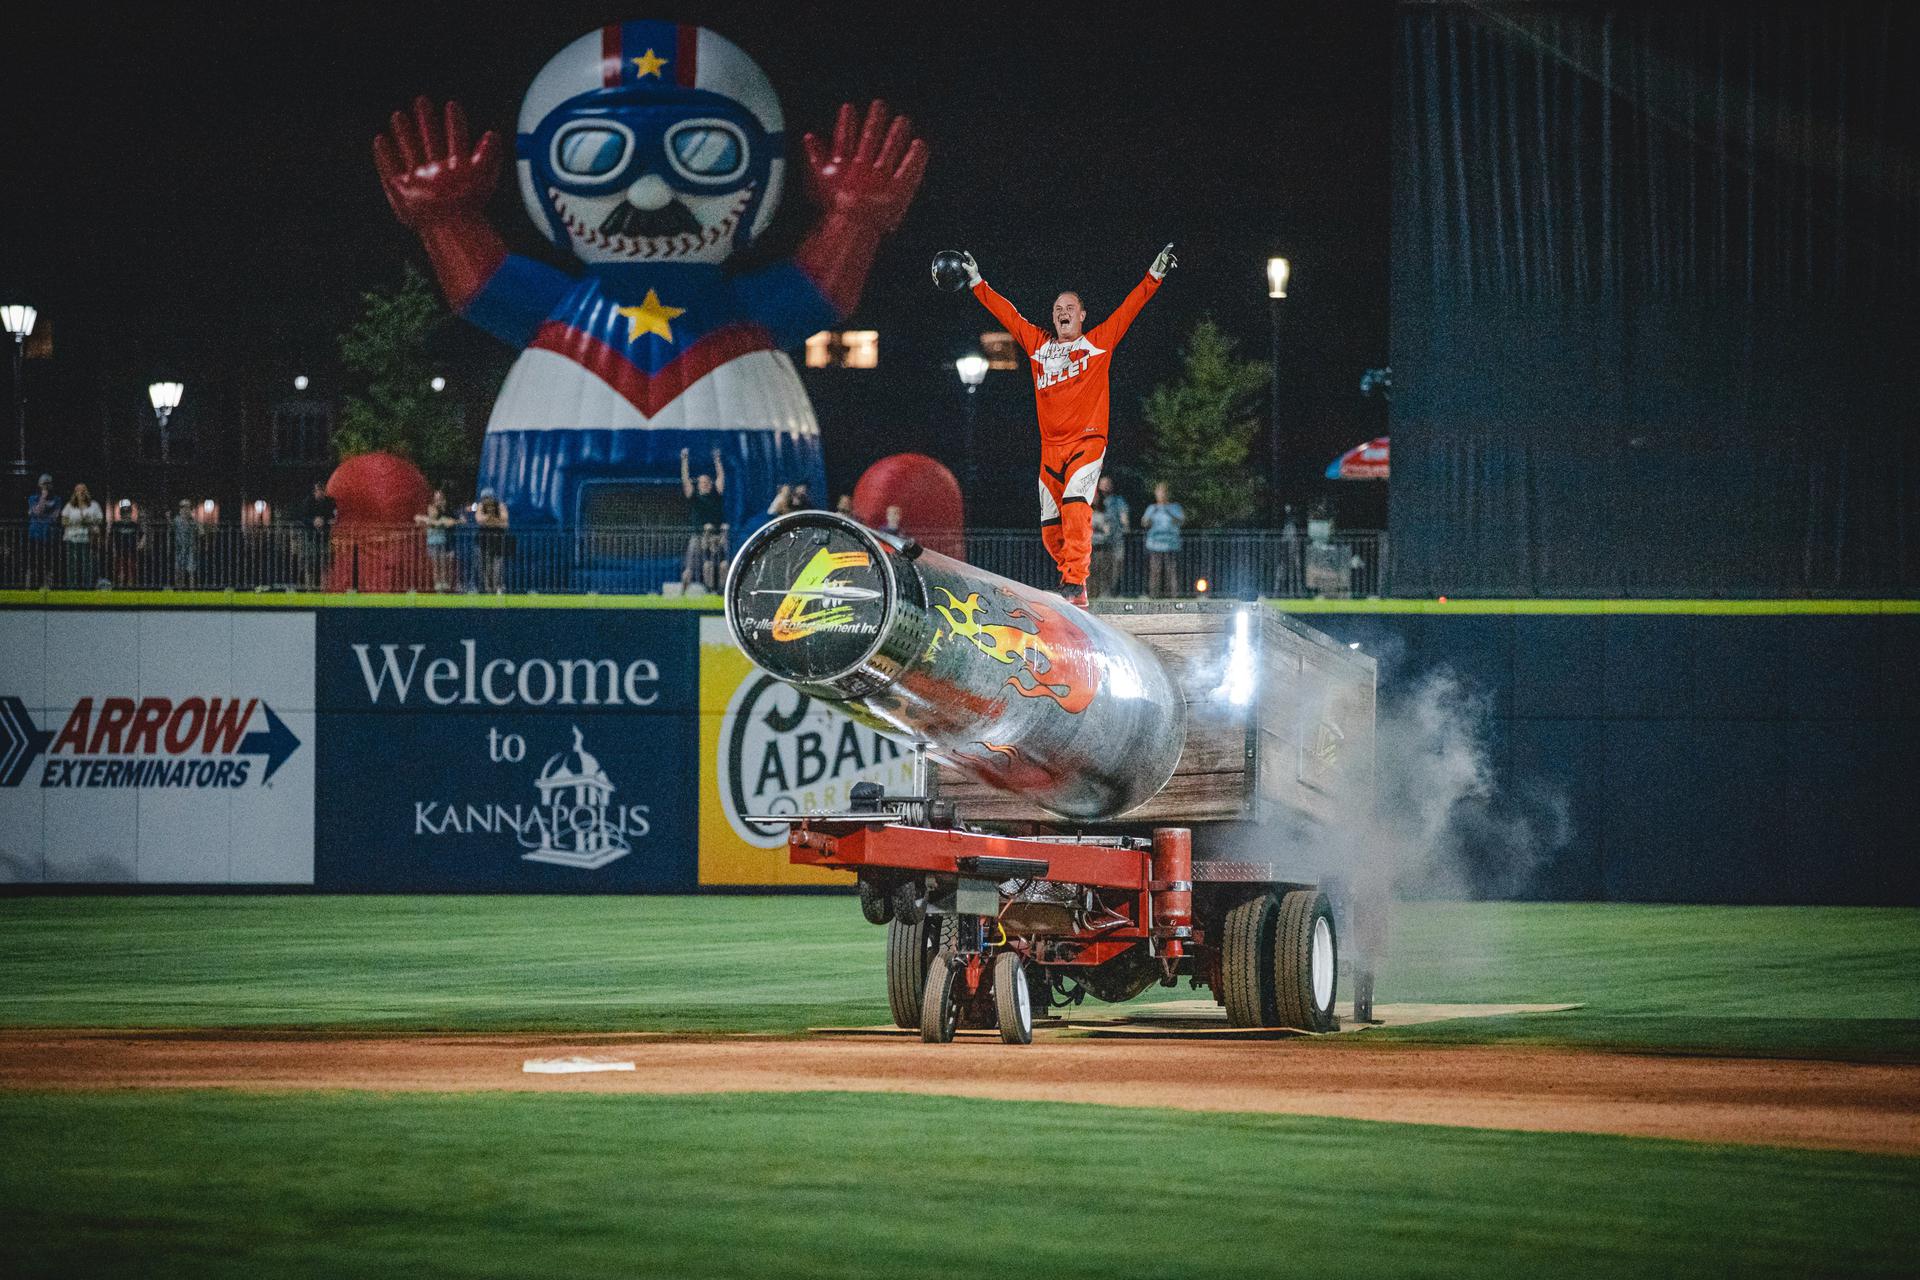 The Human Cannonball meets the Cannon Ballers